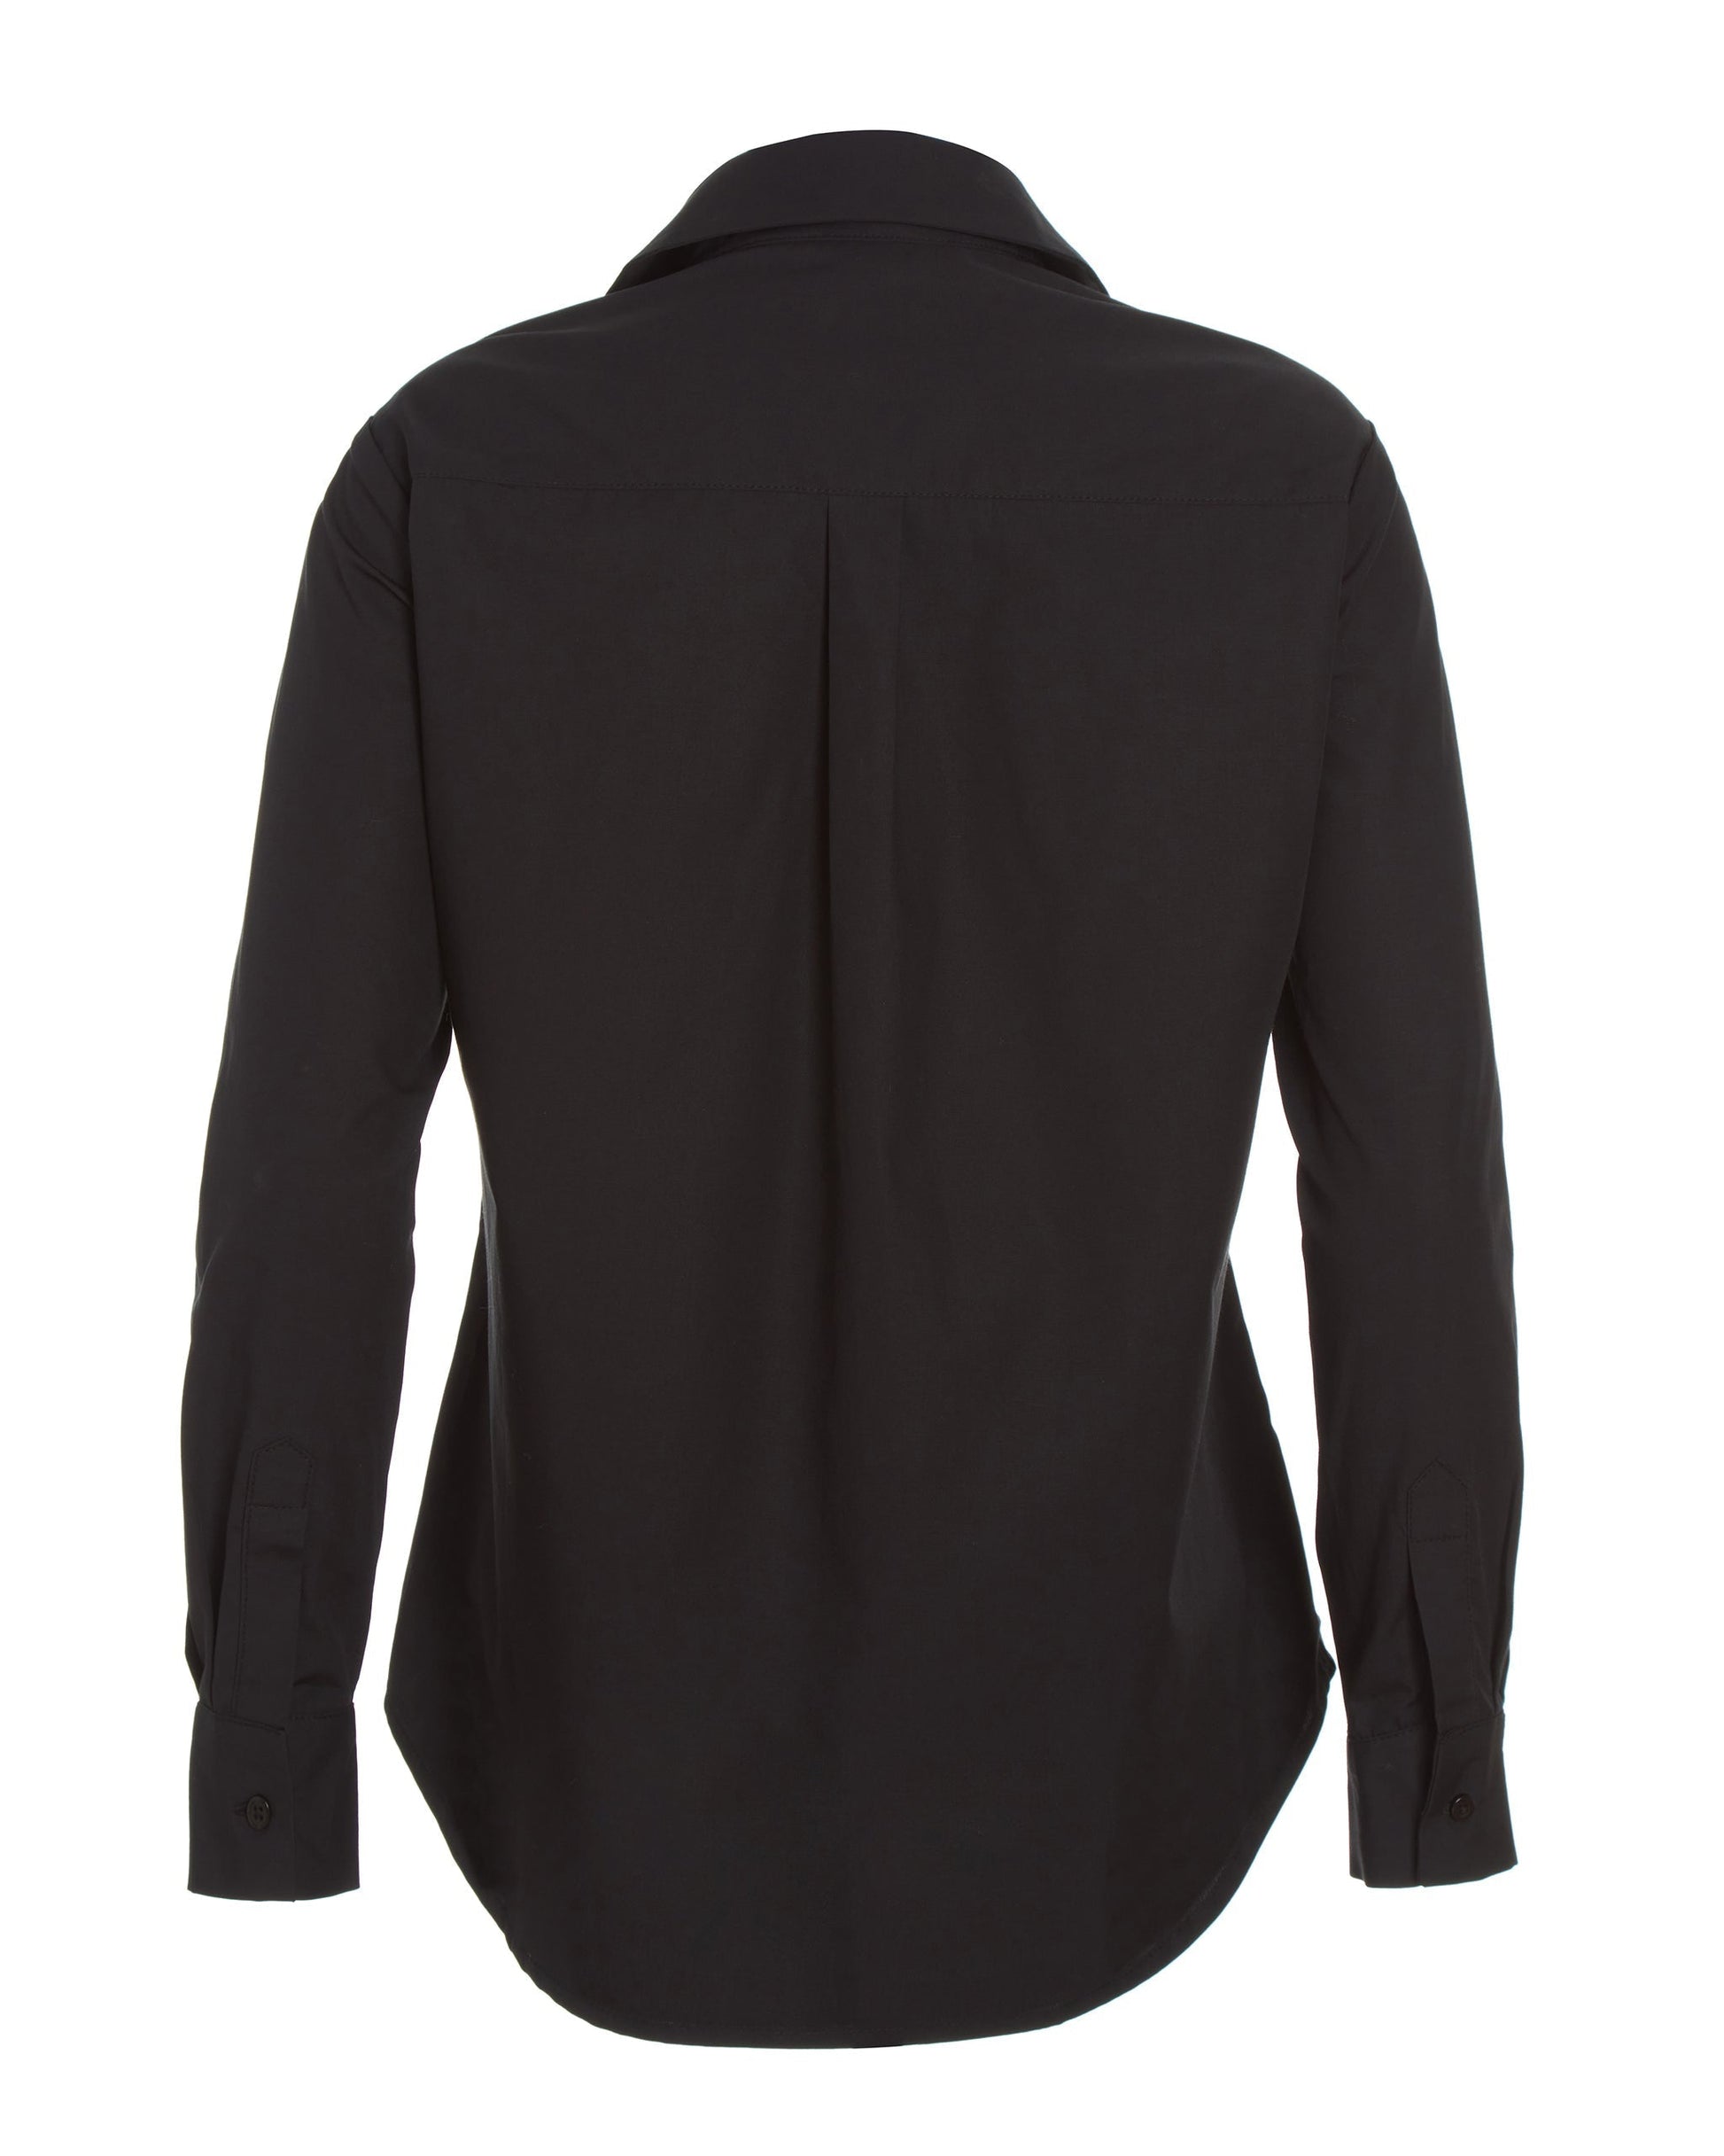 Back flat lay of black cotton long sleeve classic button down